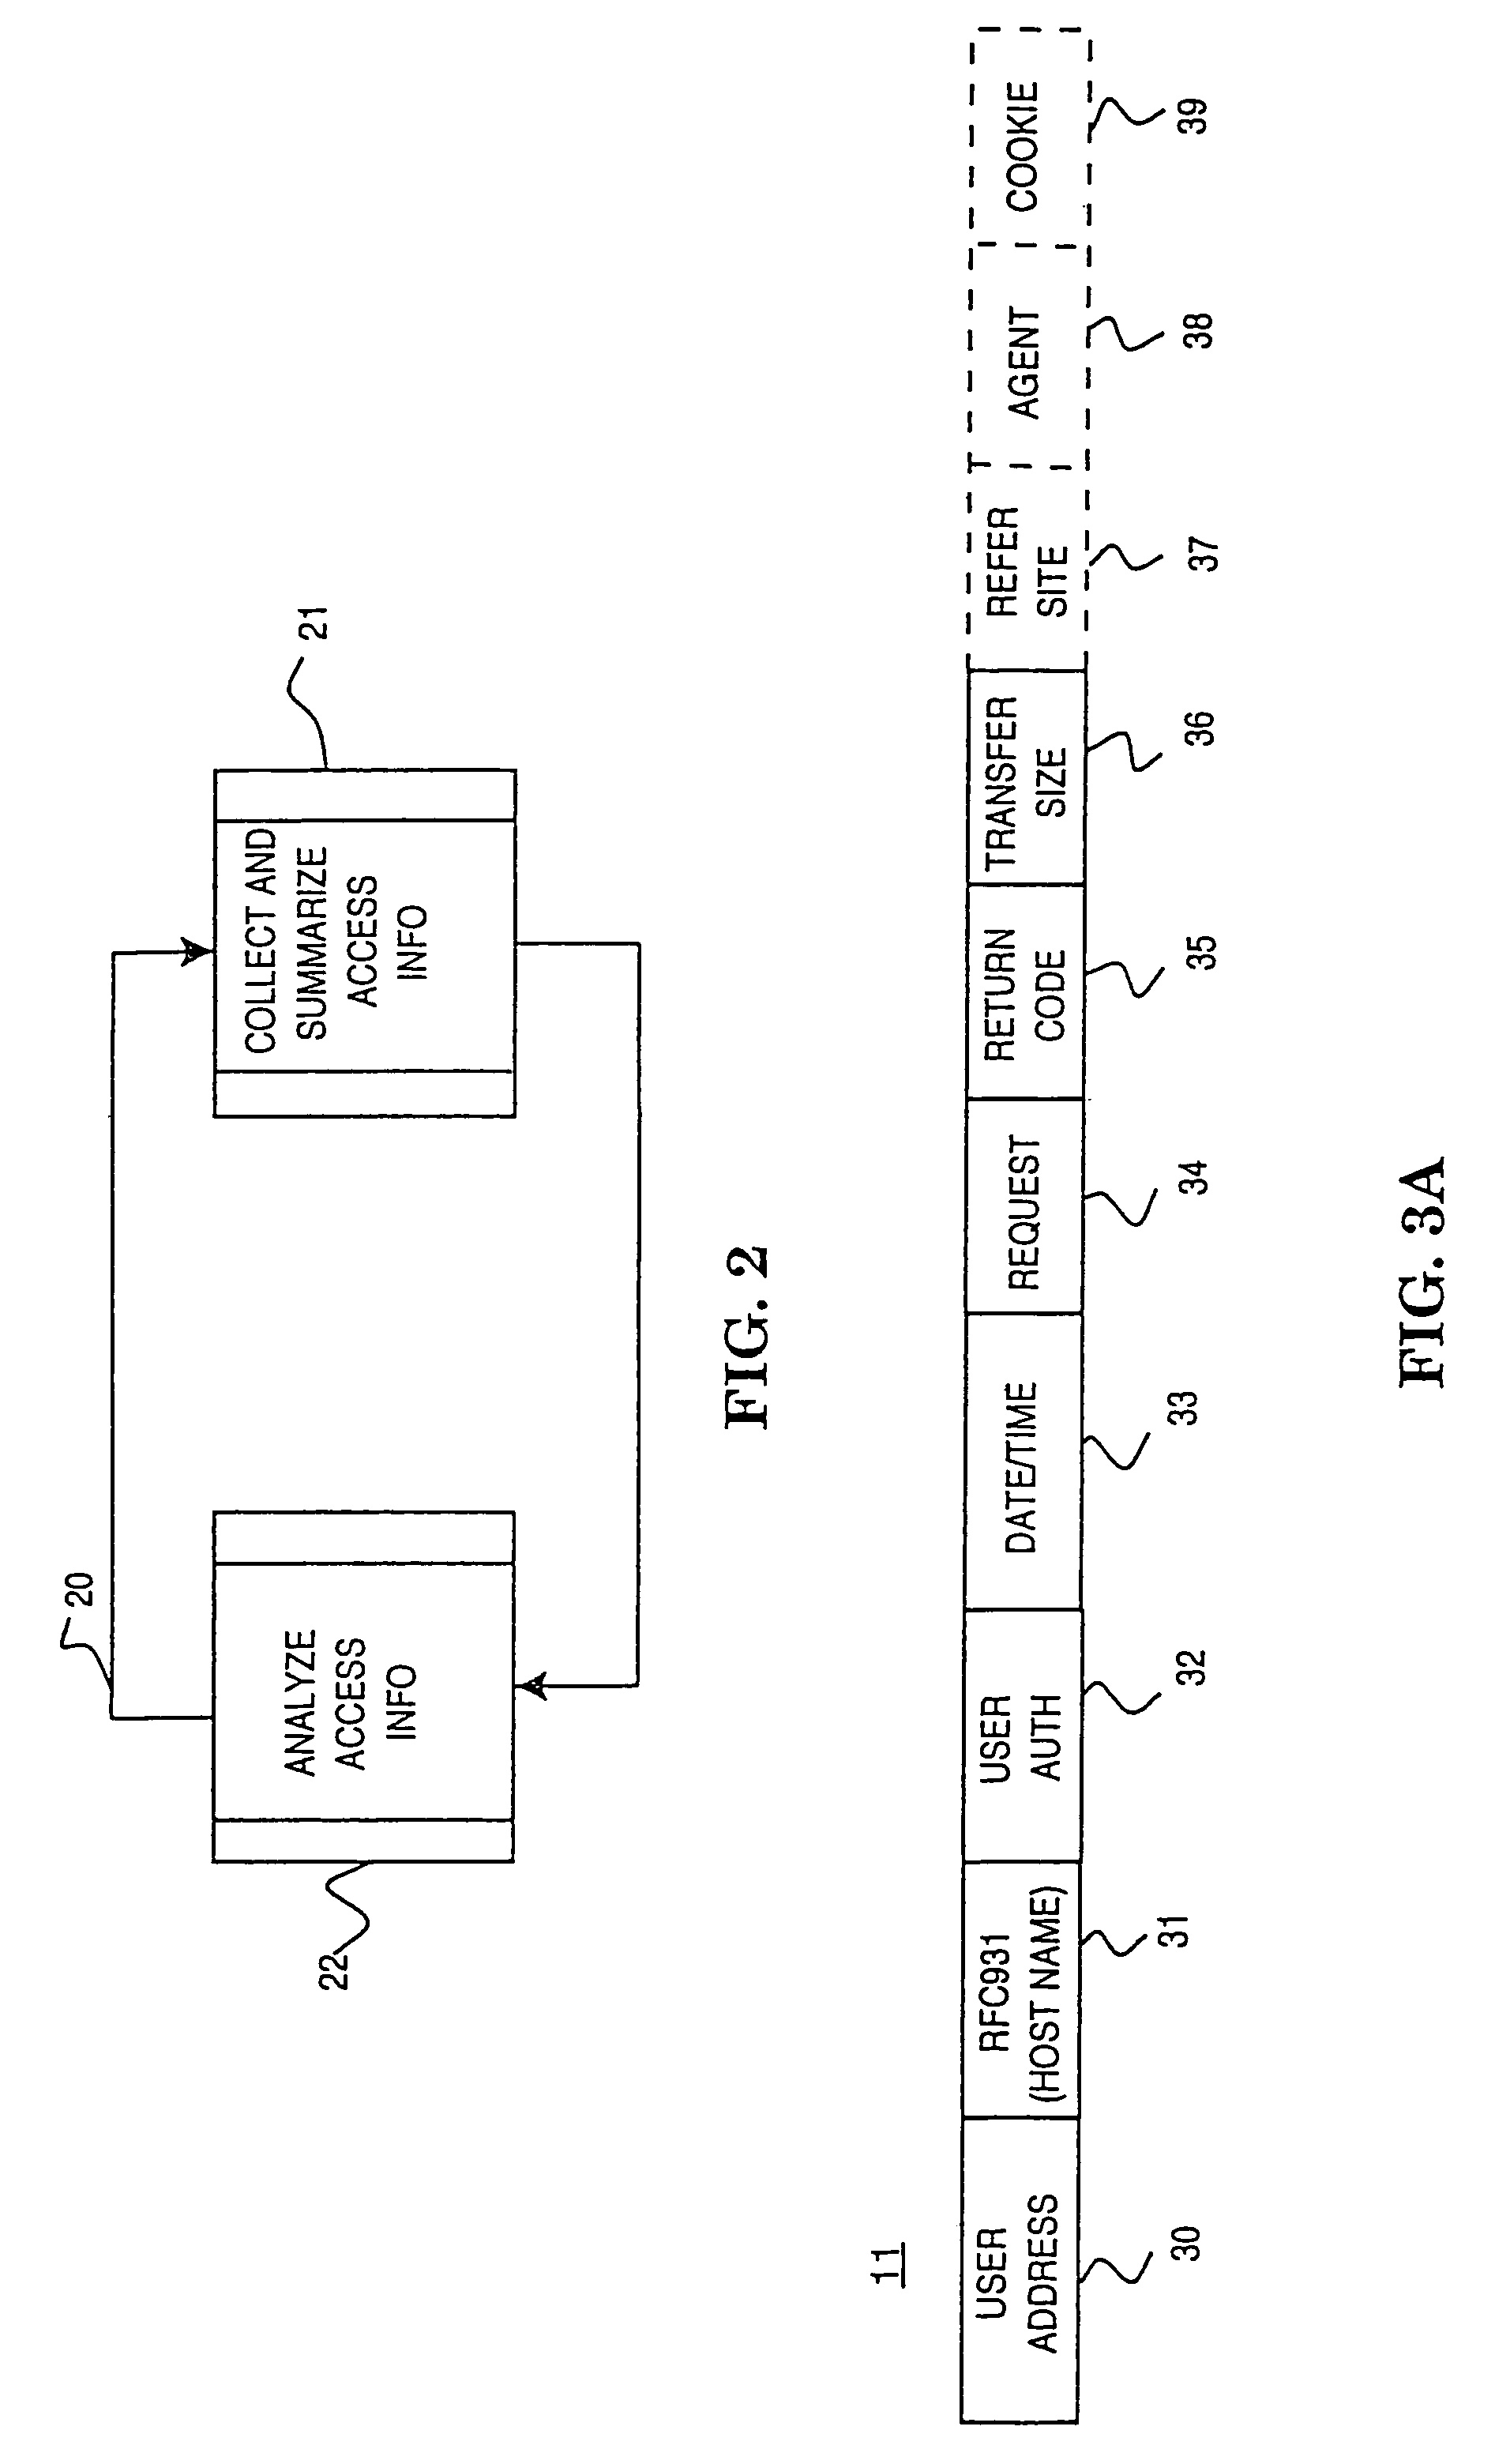 System and method for analyzing remote traffic data in a distributed computing environment